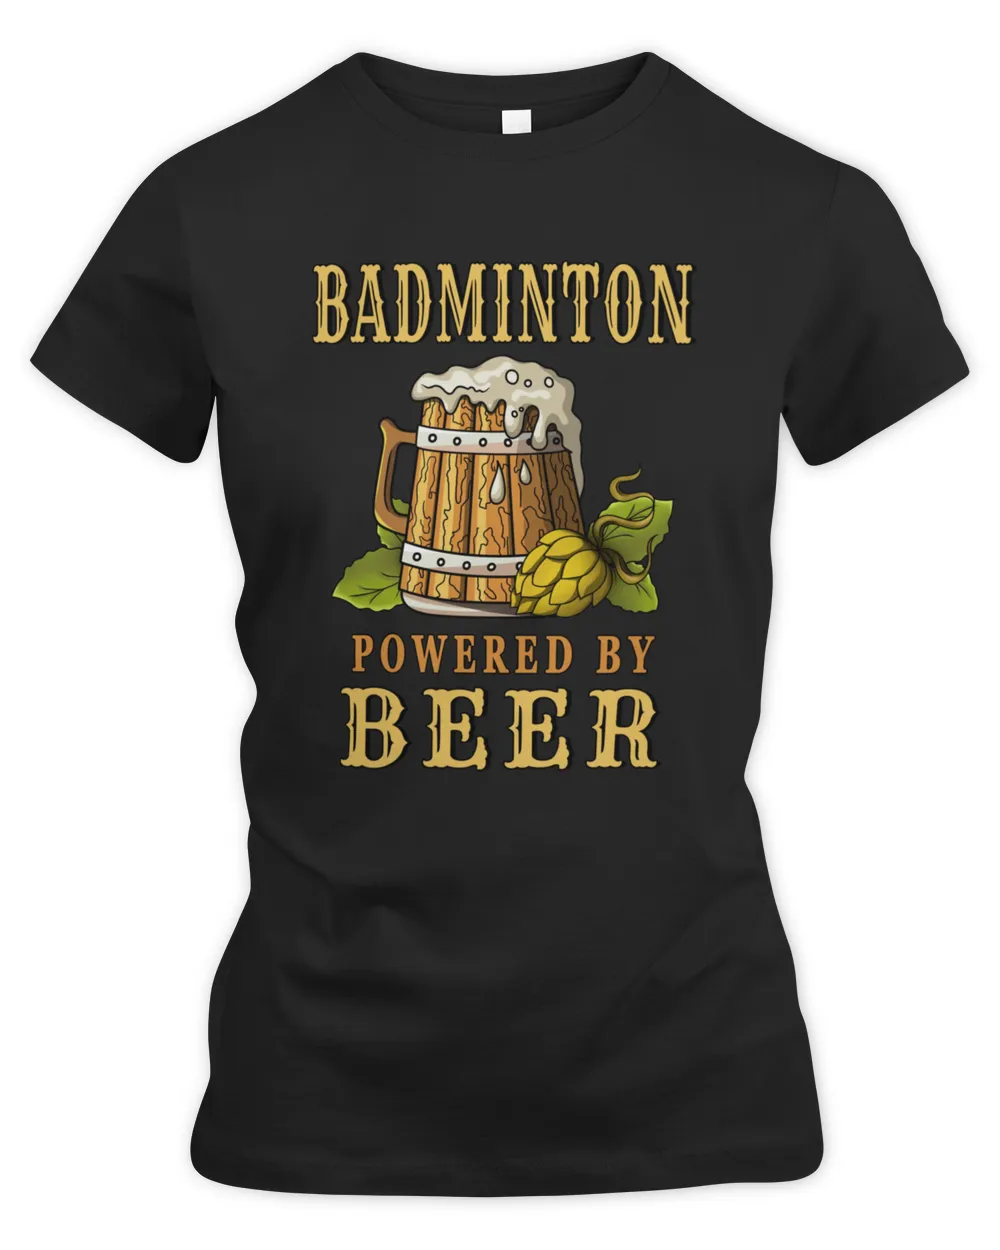 Badminton Fueled By Beer Drinker Shop Apparel and Art Prints for Men and Women430 T-Shirt